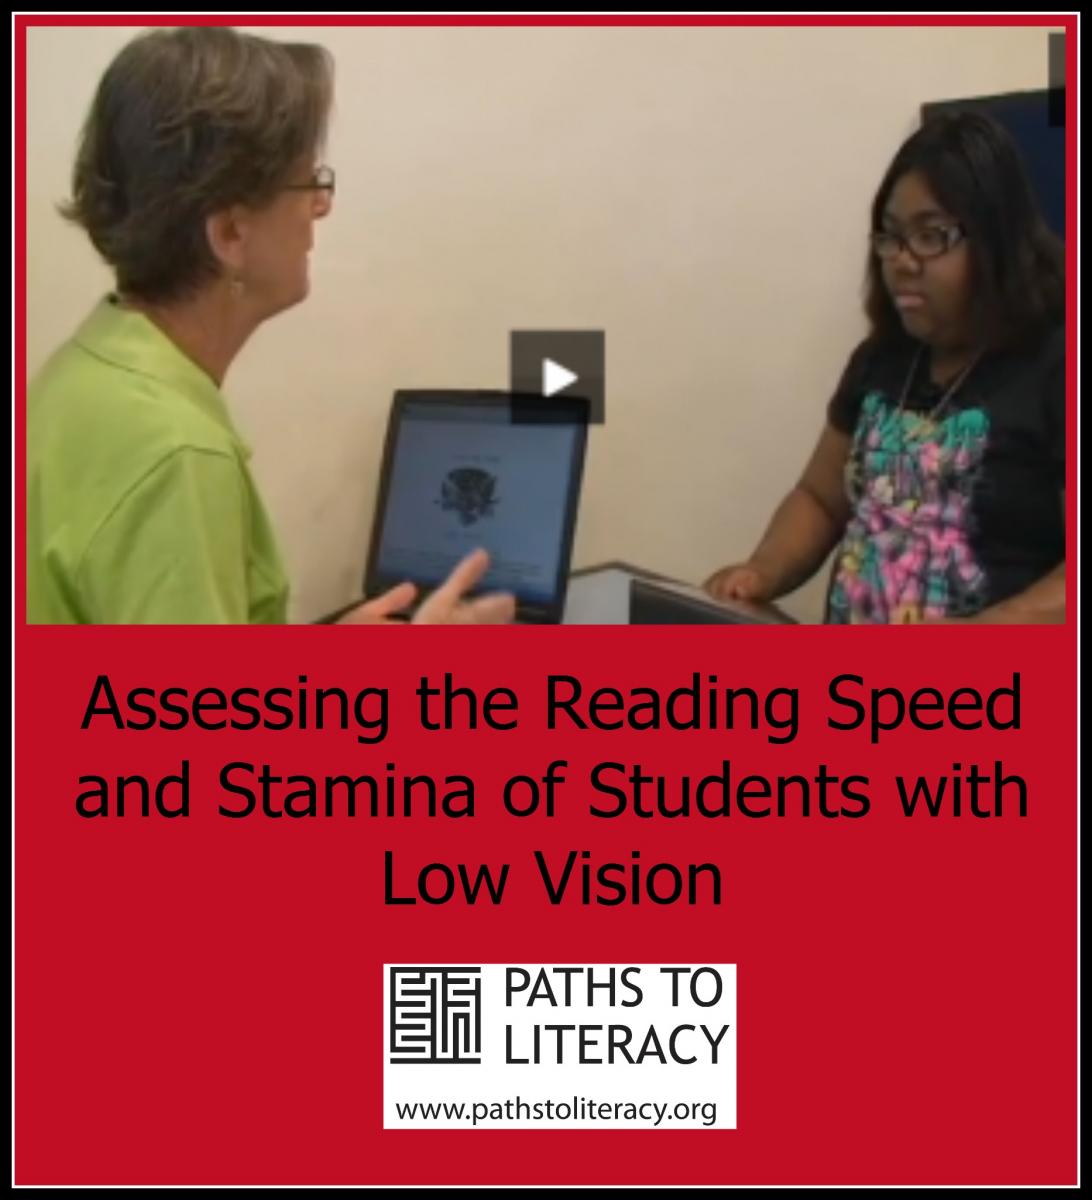 Assessing the Reading Speed and Stamina of Students with Low Vision